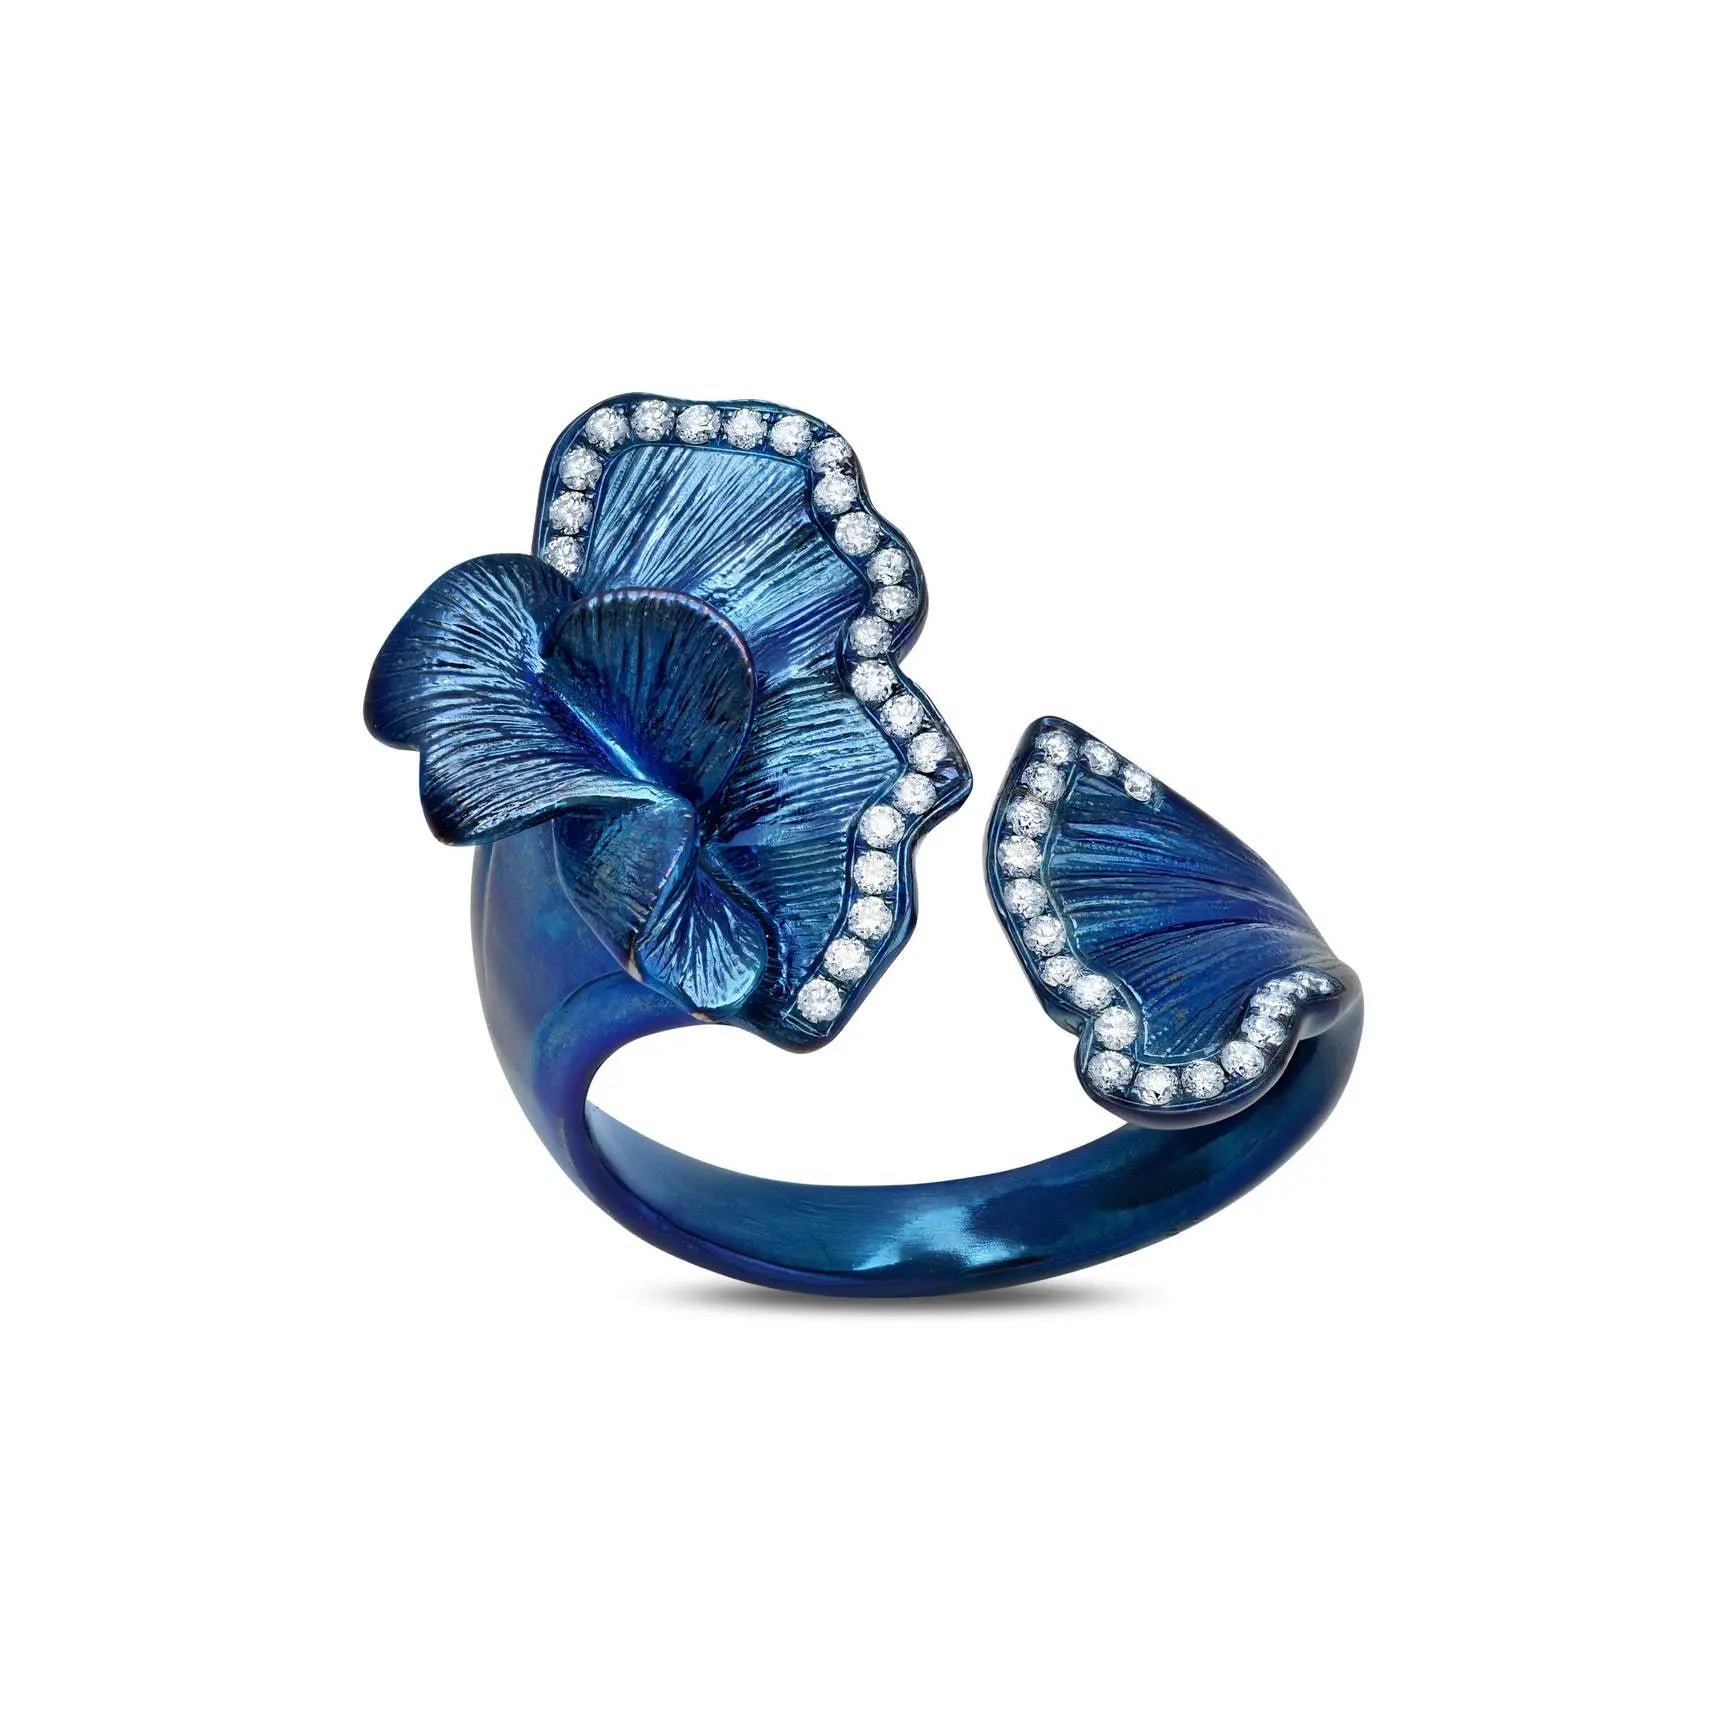 Gemstone:  .30 Carats of G-H Color White Diamonds  Metal:  Titanium, 4.19 Grams  Colors: Blue Titanium  Ring Size 7  If you need a different size, please email shop@sbvail.com  Designed by Graziela Gems